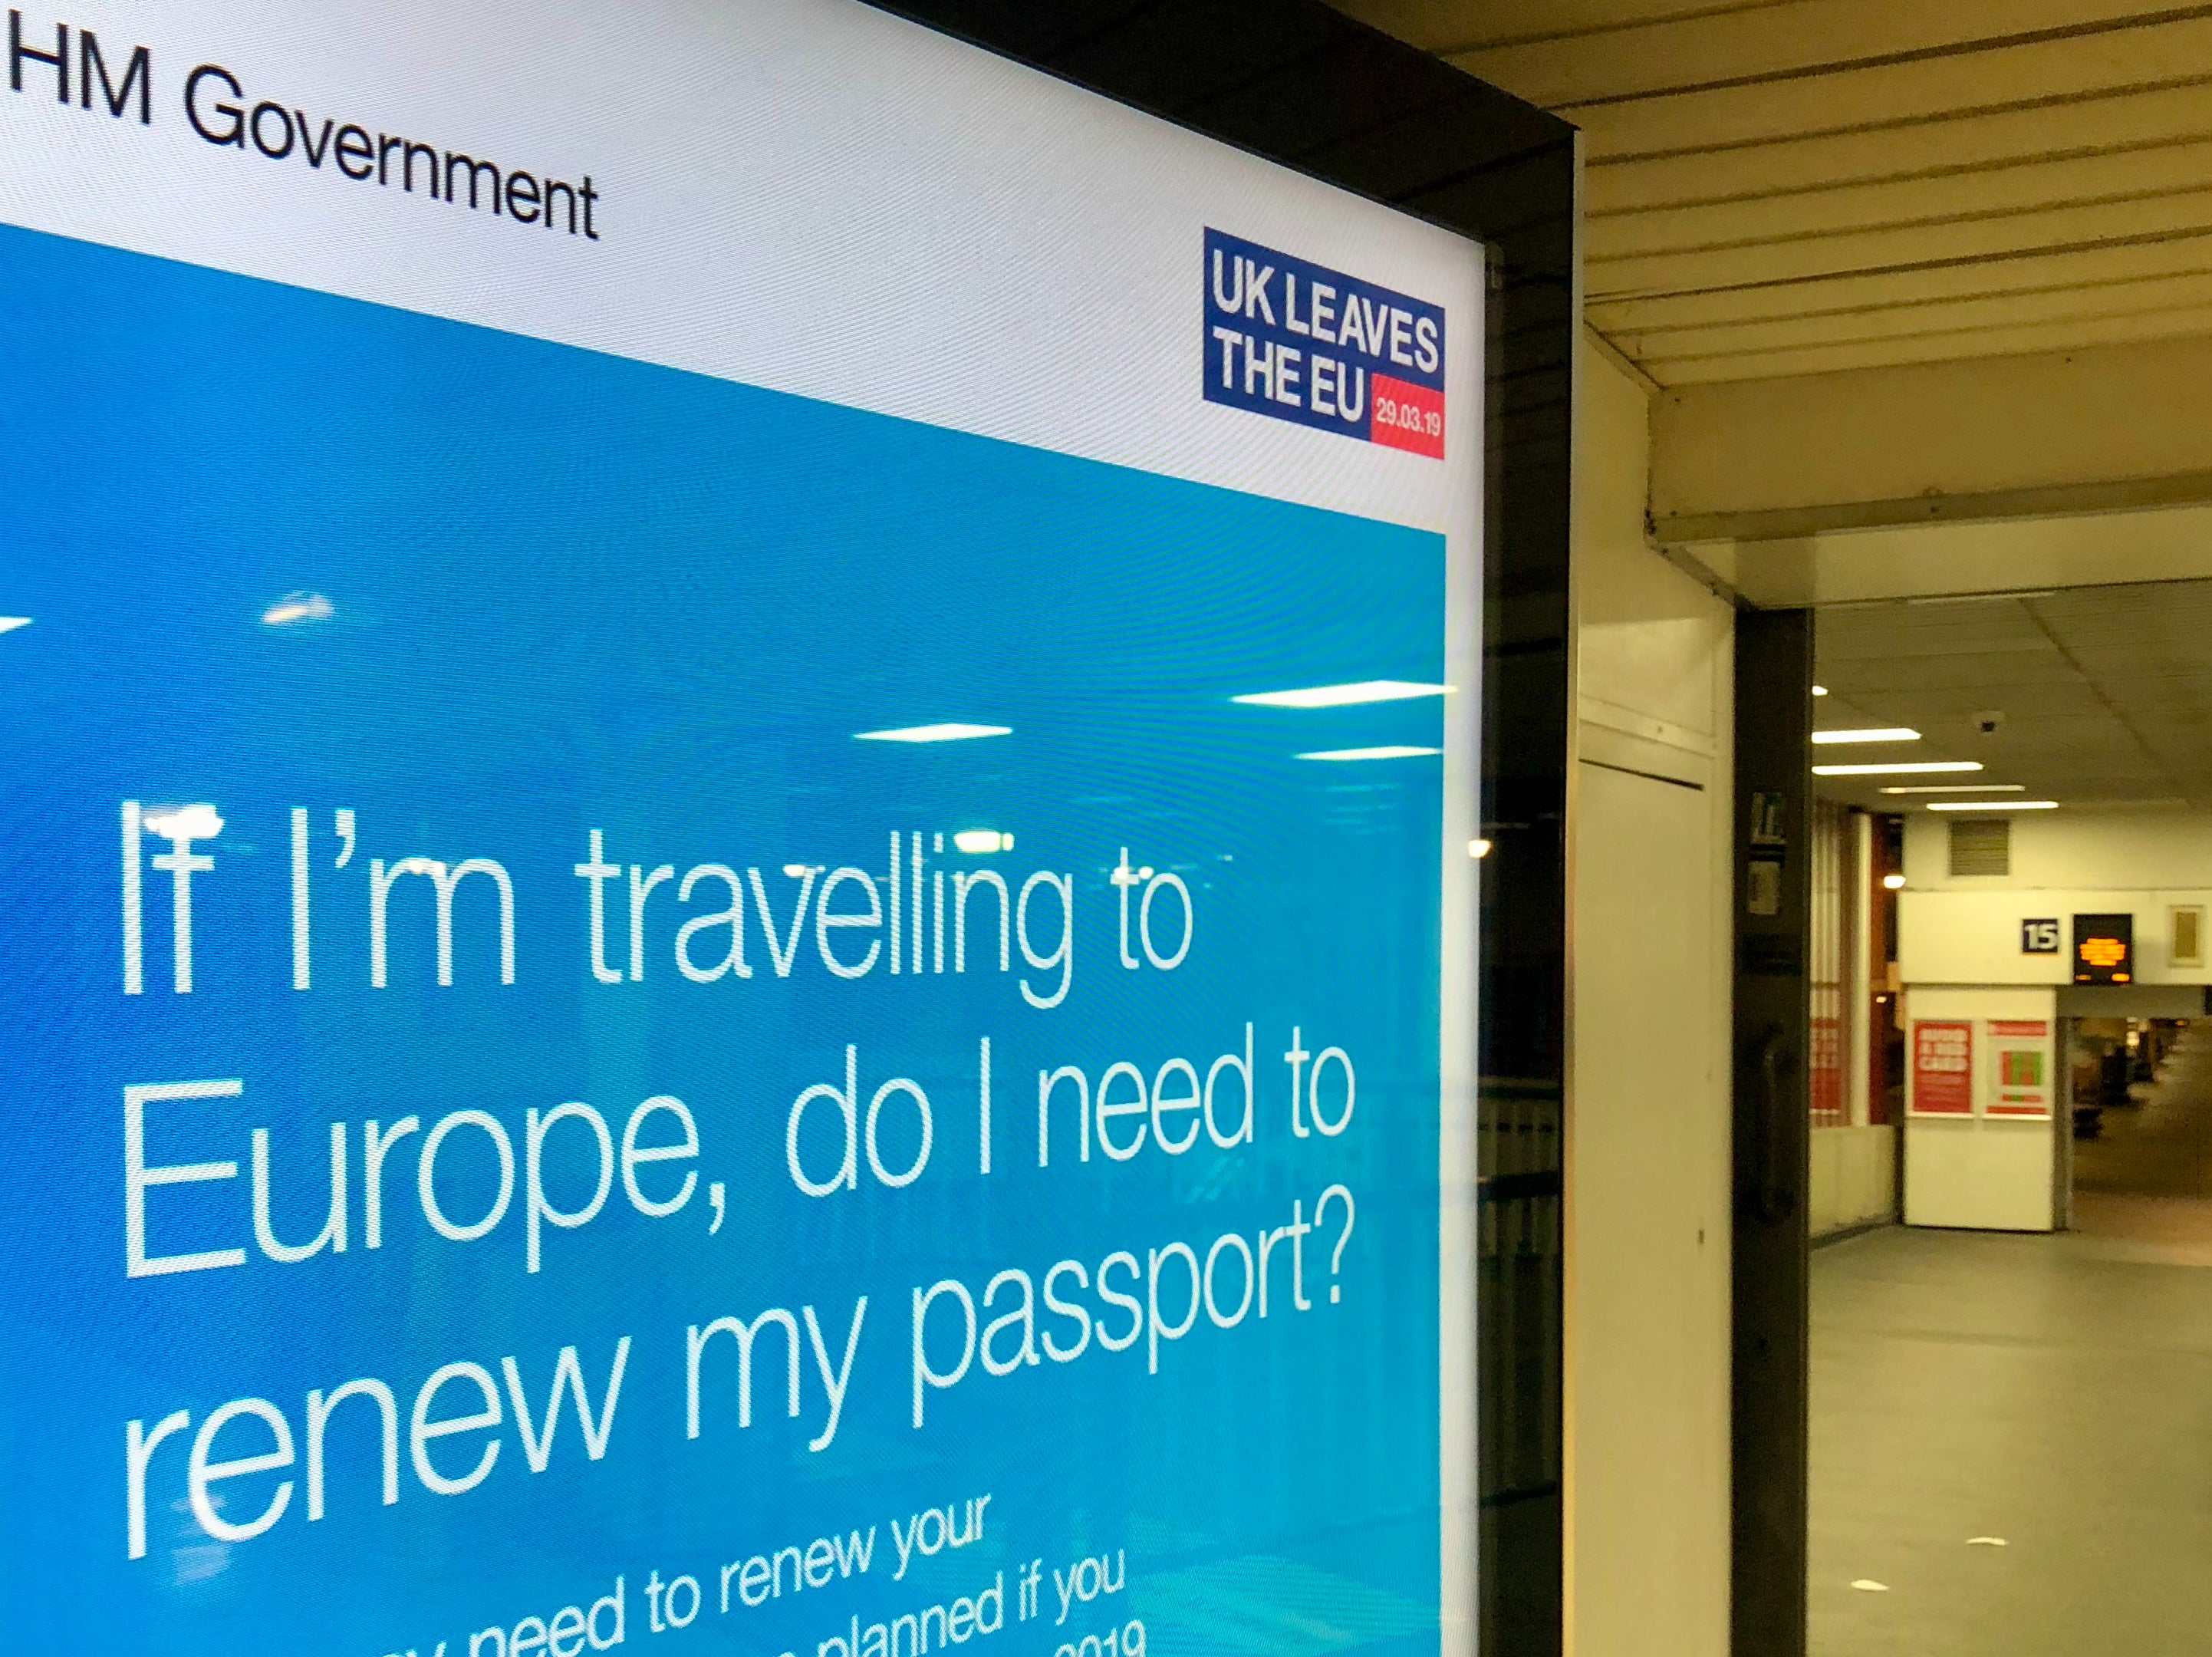 Warning sign: government poster warning travellers about new restrictions on passport validity after Brexit